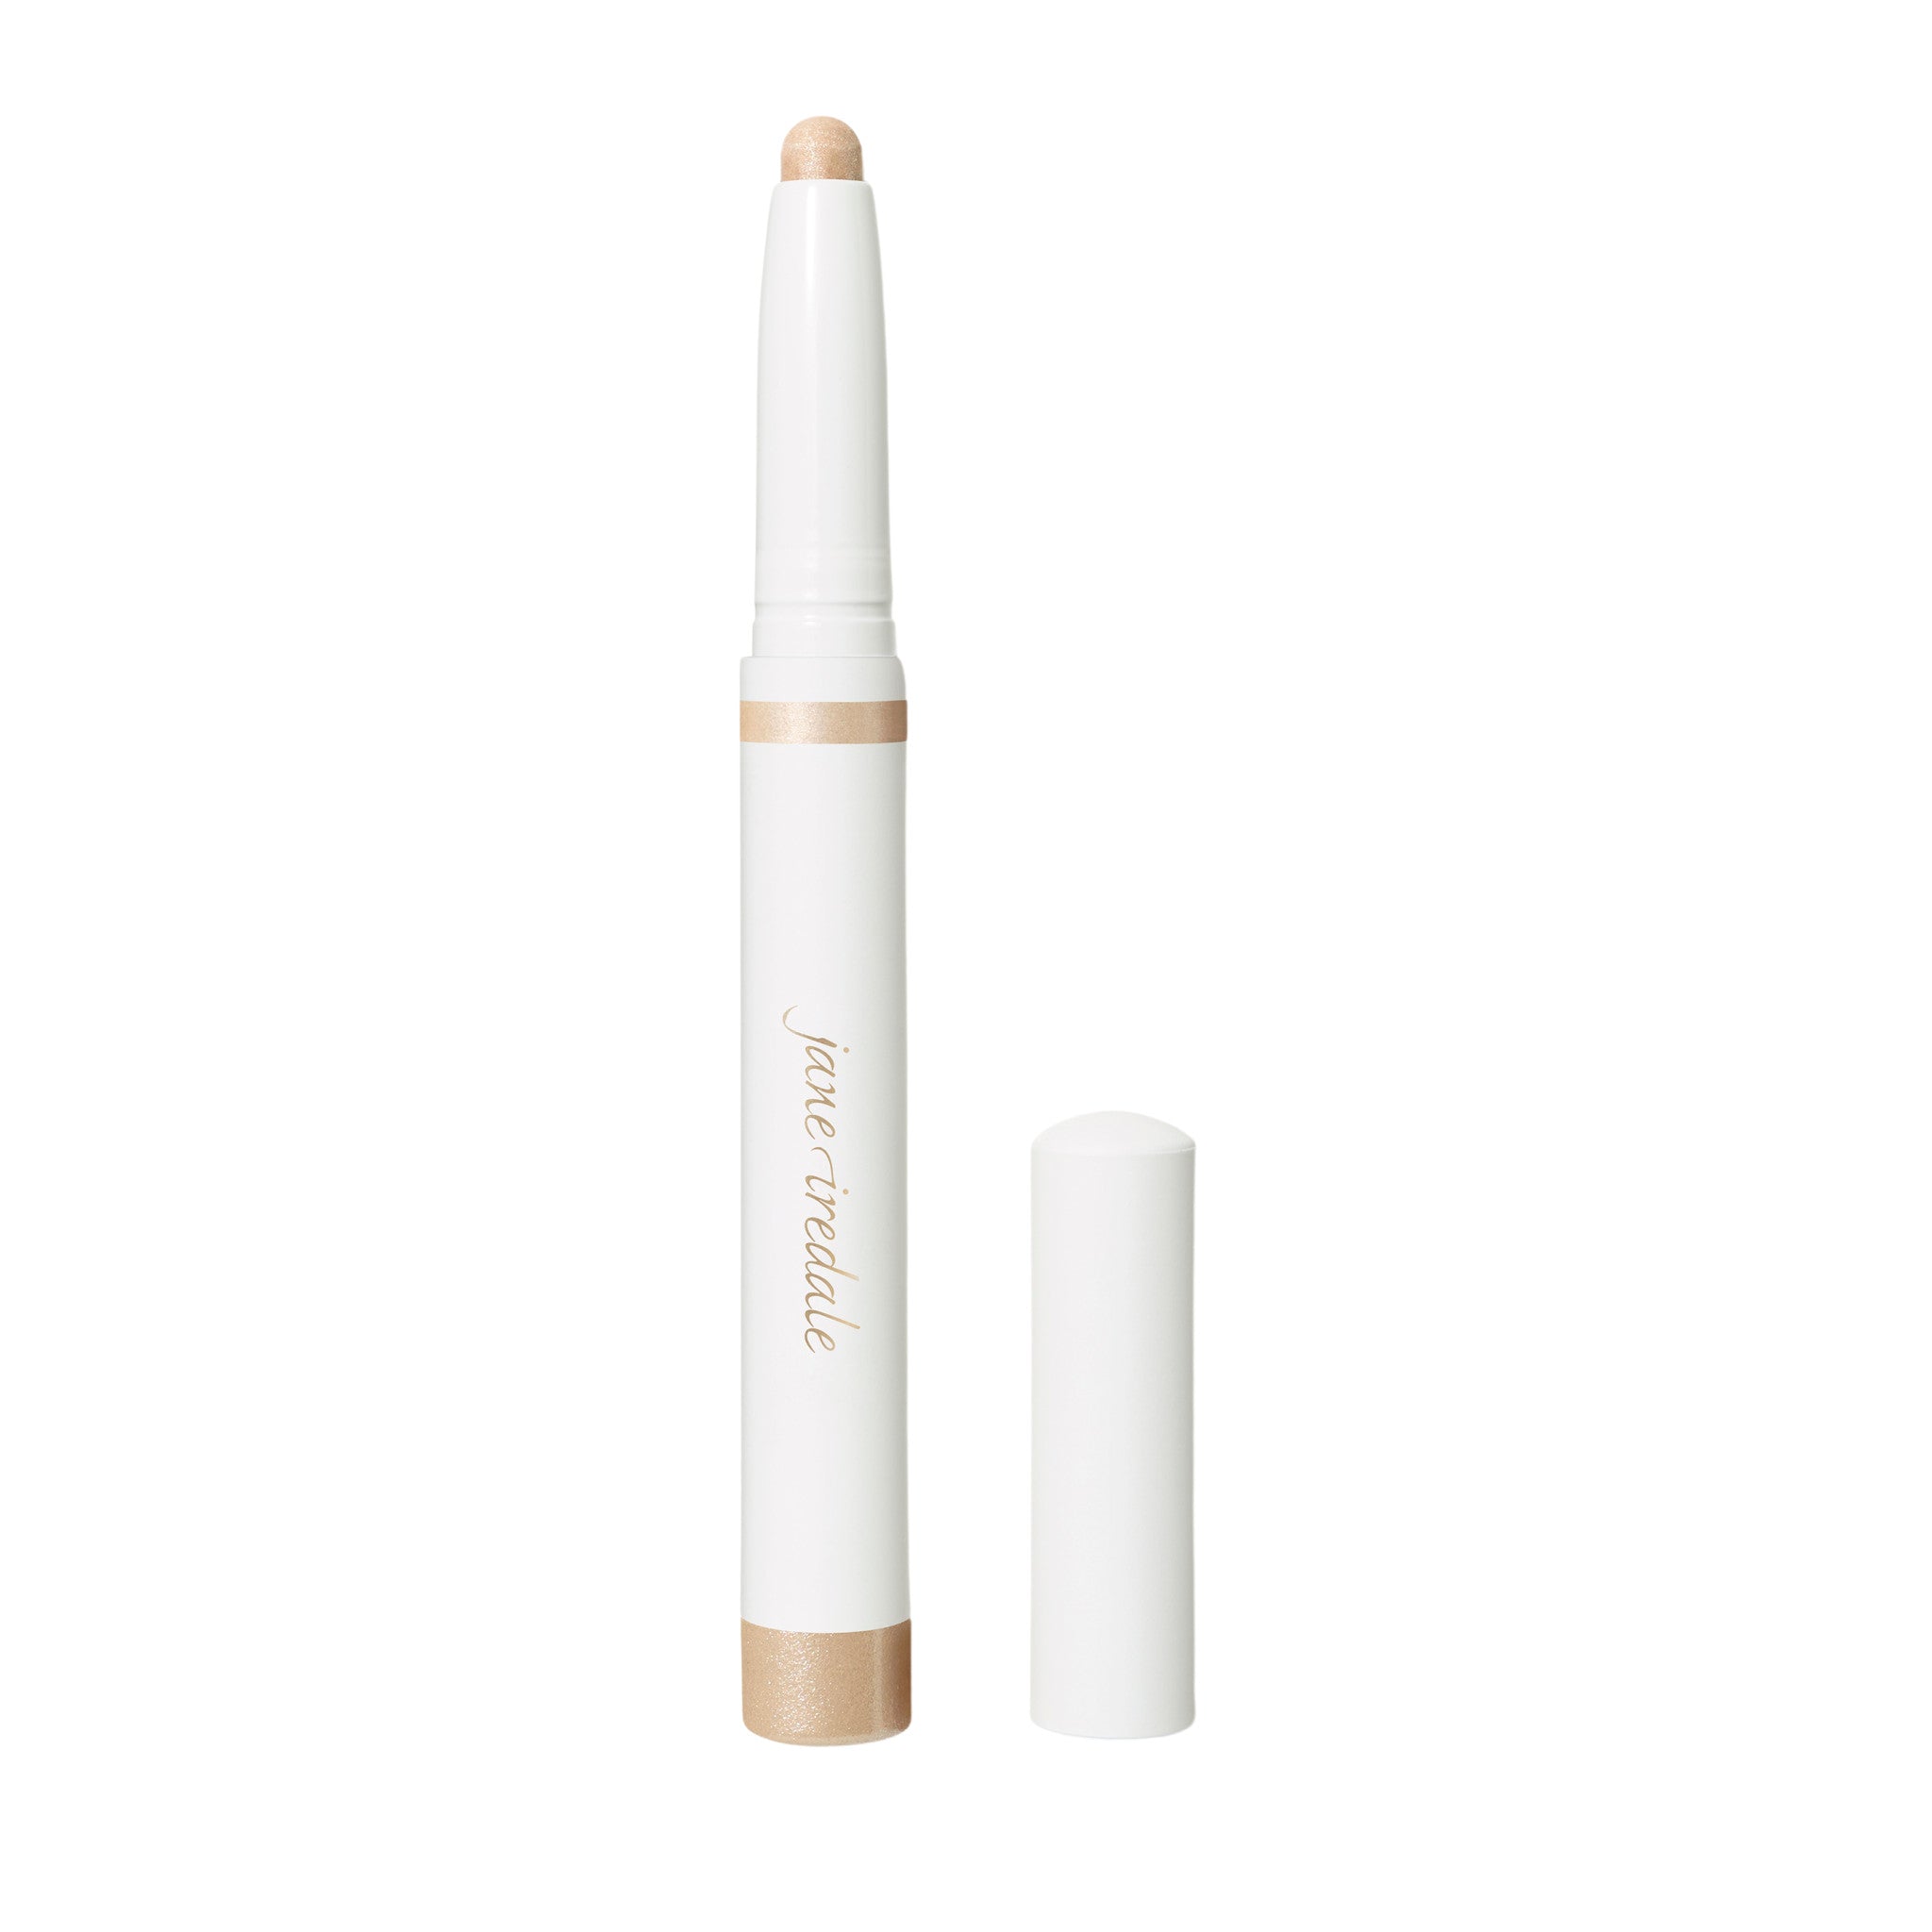 Jane Iredale ColorLuxe Eye Shadow Stick Color/Shade variant: Moonstone main image.